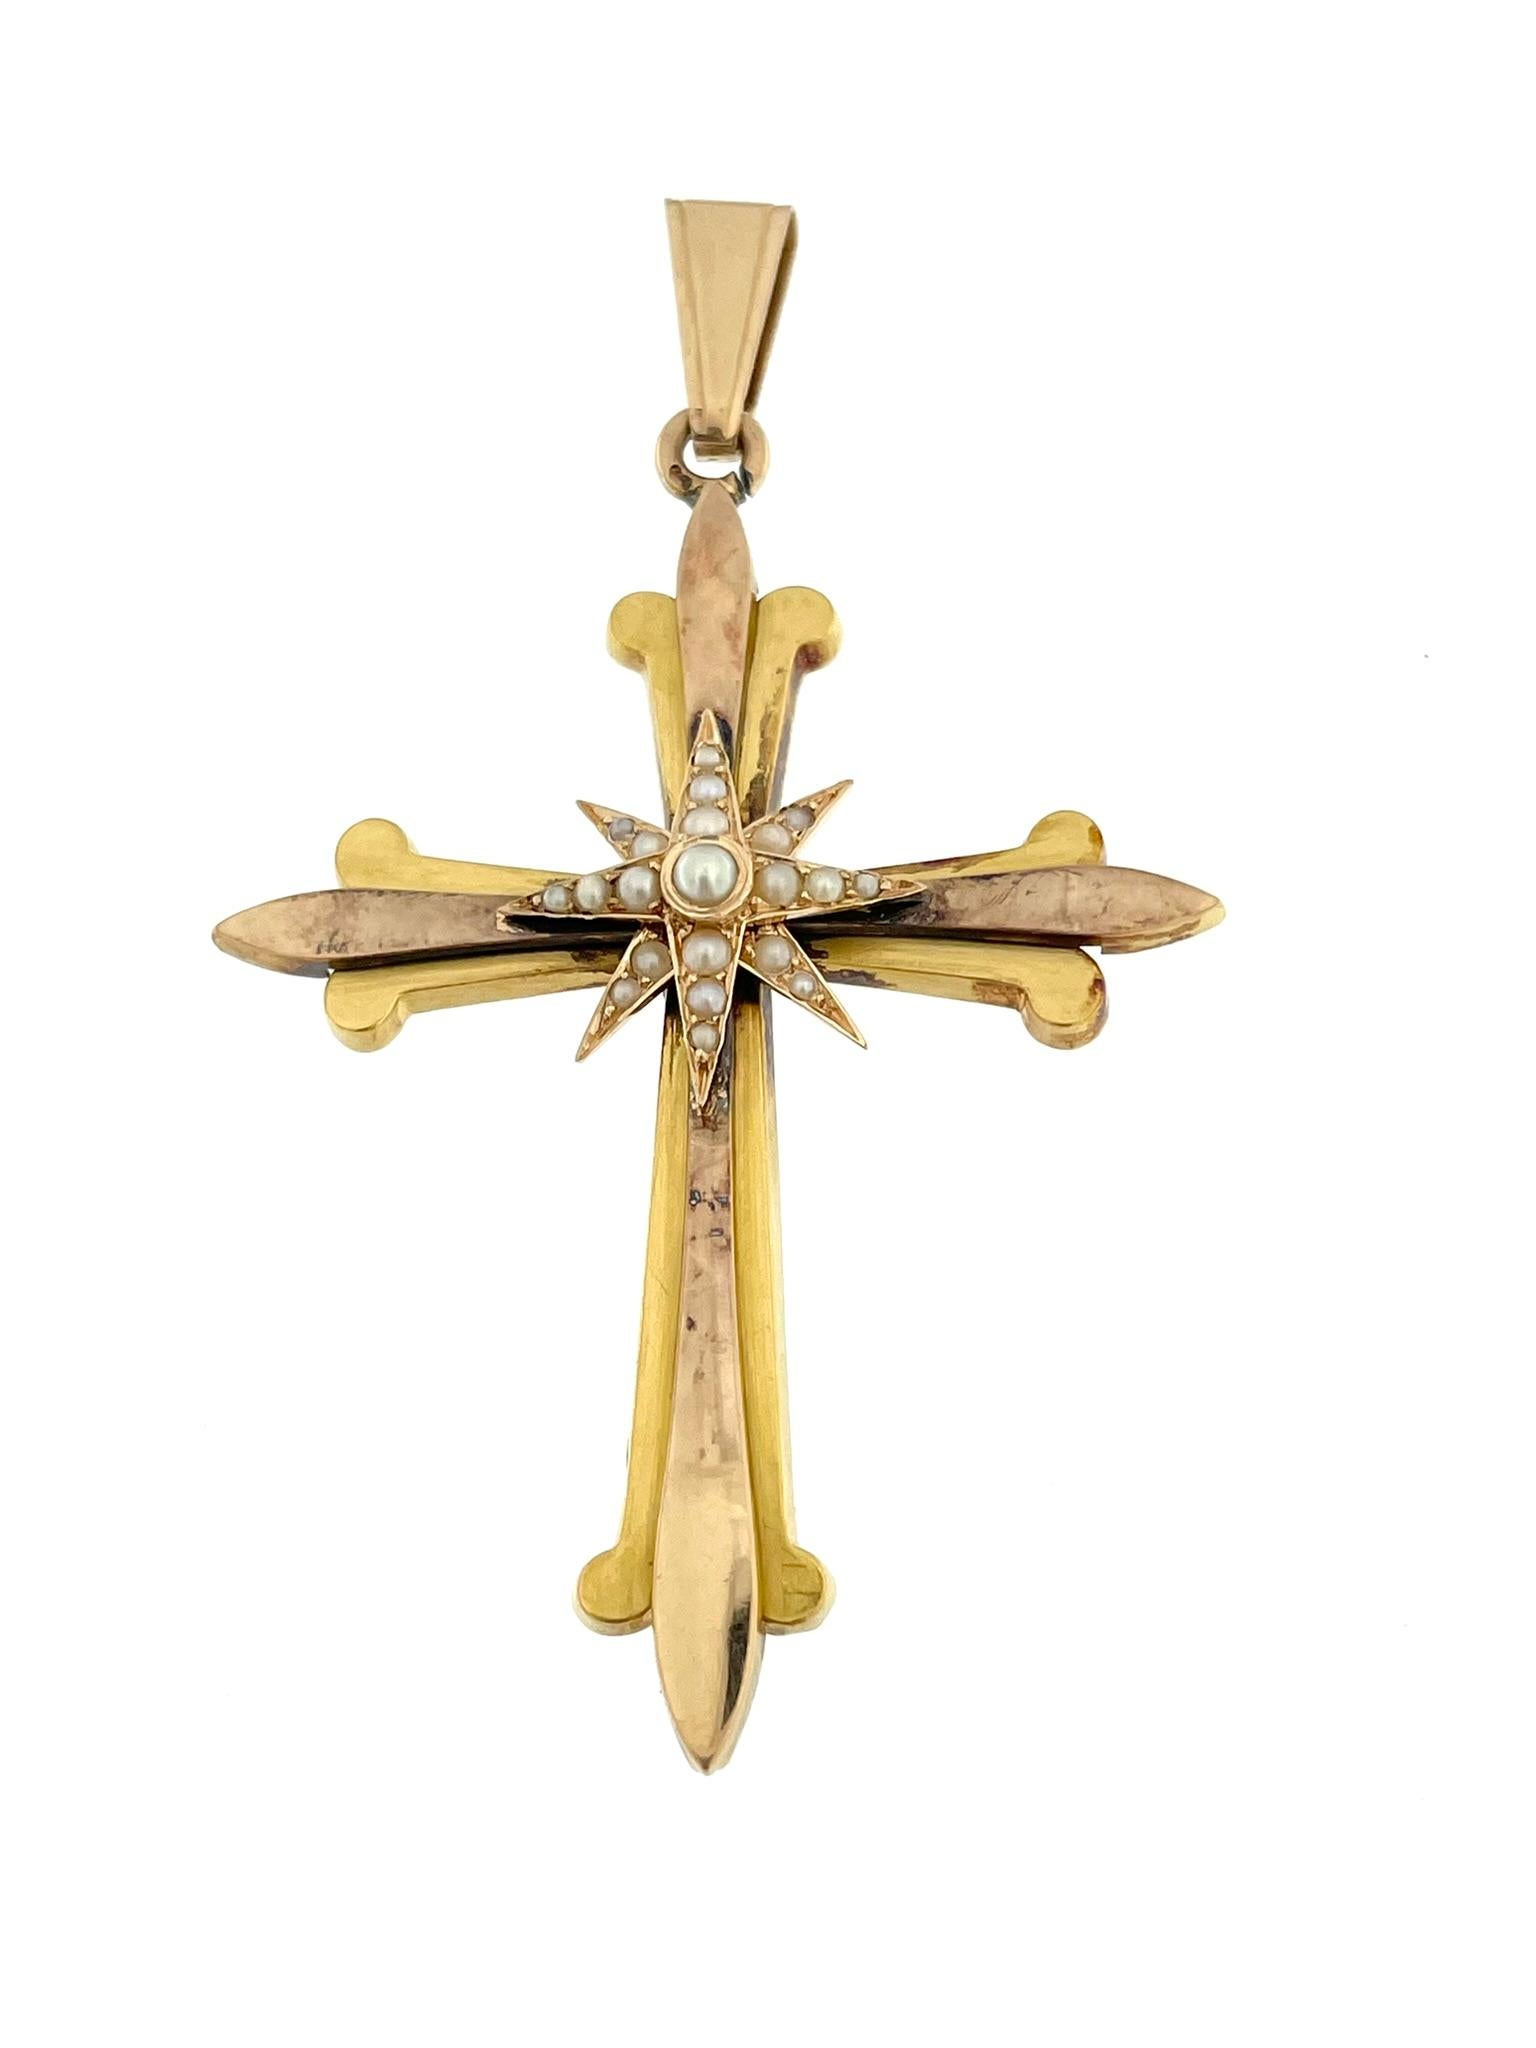 The Antique Spanish 18-karat Gold Cross is a captivating piece of jewelry that exudes both history and elegance. Crafted in a combination of yellow and rose gold, the cross features distinctive lily flower endings, adding a touch of grace and